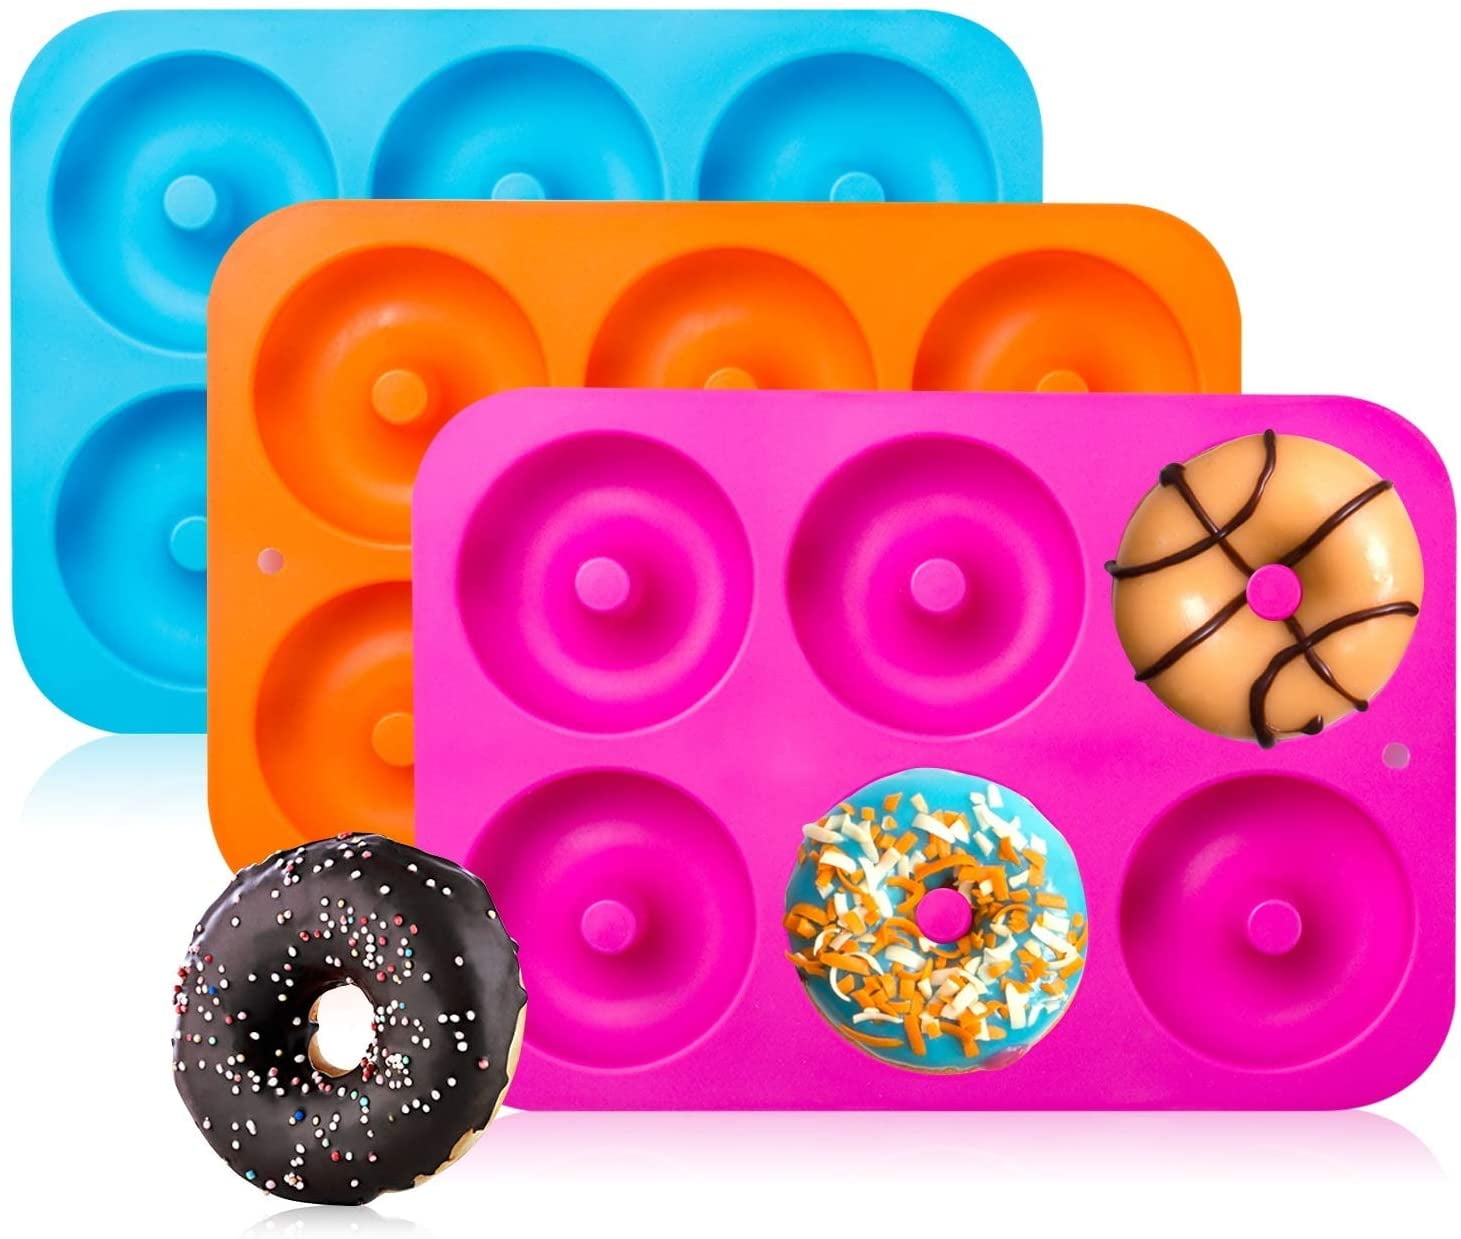 Light Color To encounter Silicone Donut Mold Nonstick Silicone Donut Baking Pan Makes Perfect 3 Inch Donuts 24Pcs Silicone Muffin Cups Cake Mold 